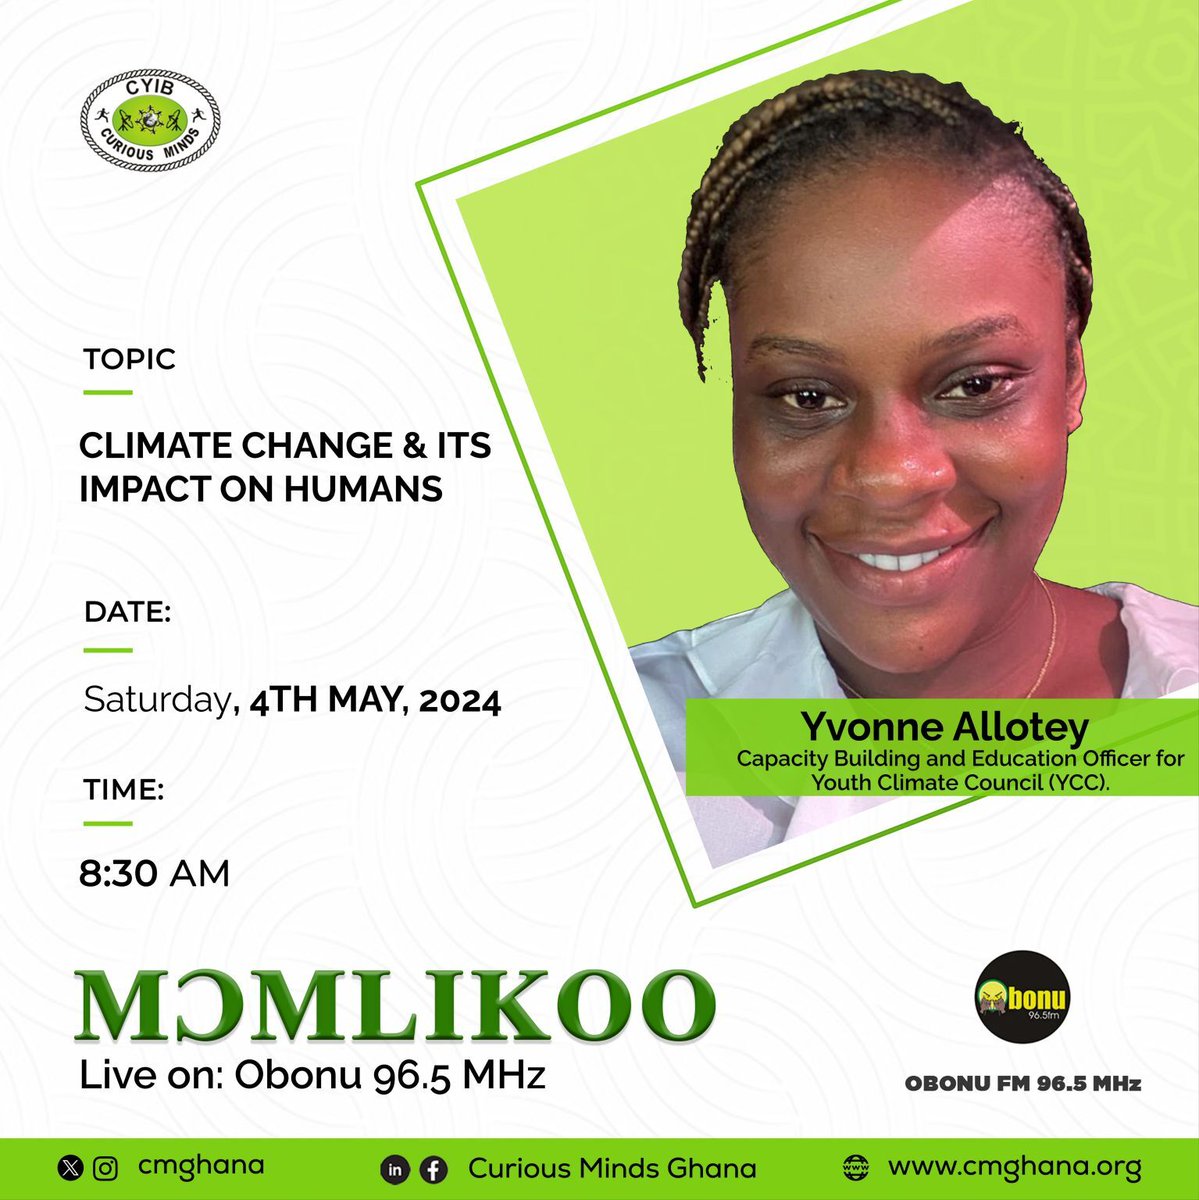 Listen in today at 8:30am on Obonu FM as our Capacity Building and Education Officer, Yvonne Allotey, talks about climate change and its impacts on humans. Let's take #climateaction now🌱💪‼️ #YouthMovement